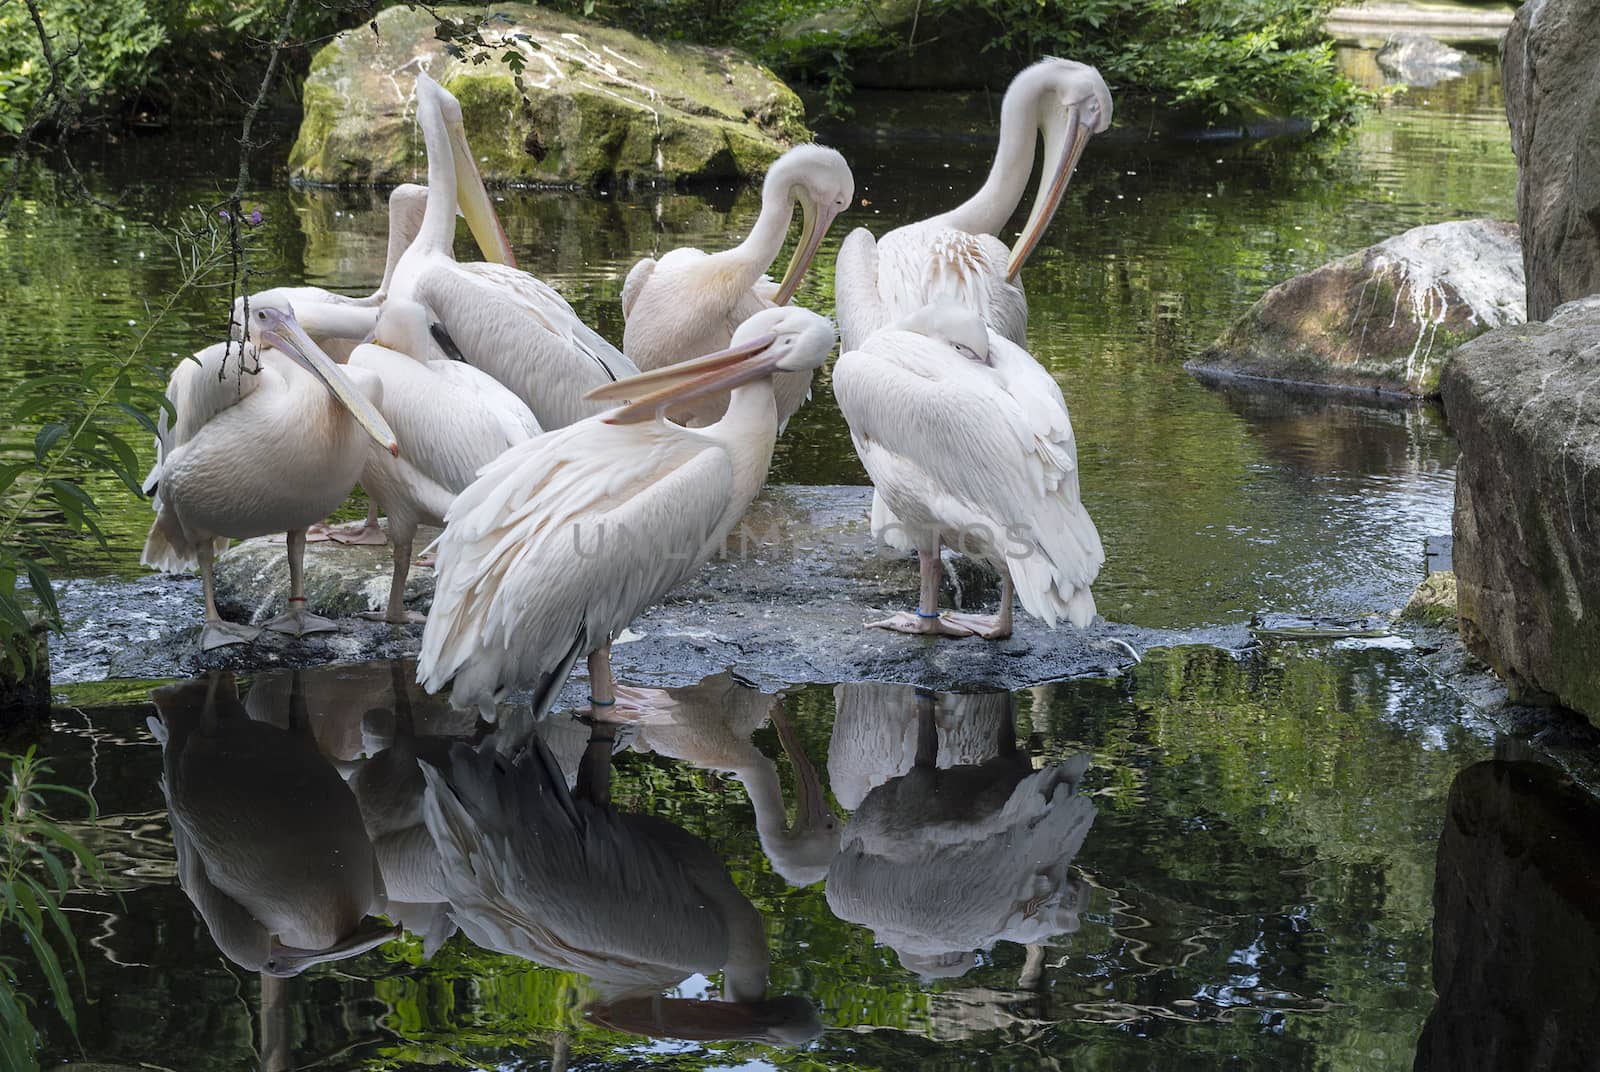 group of pelicans on wooden trunk with reflection in the water and rocks at the side